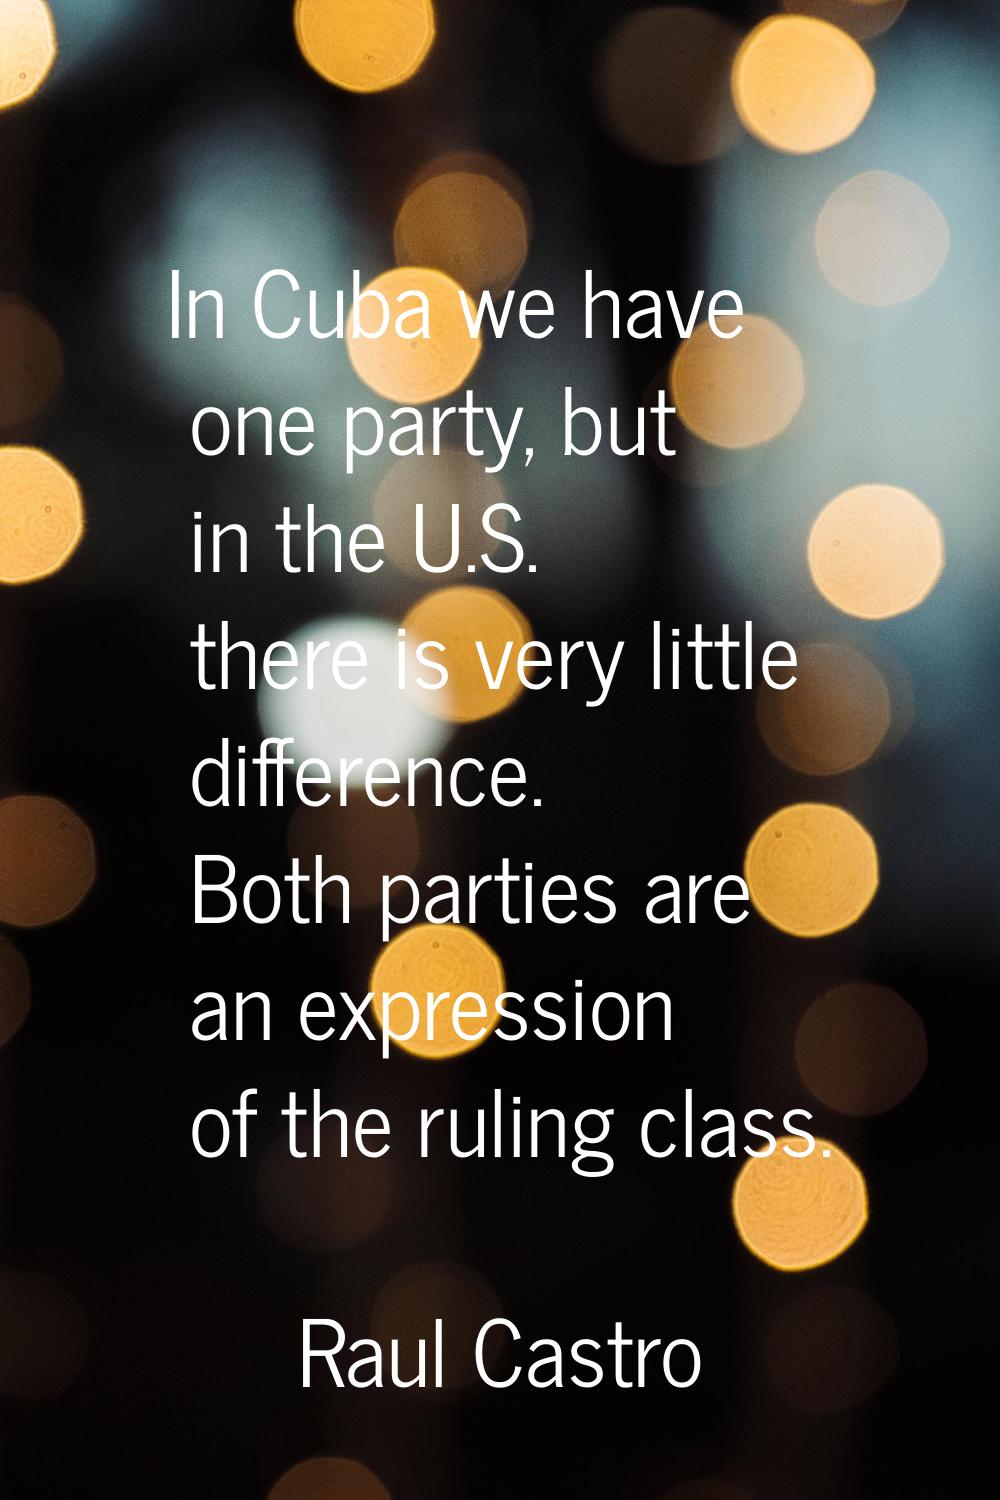 In Cuba we have one party, but in the U.S. there is very little difference. Both parties are an exp